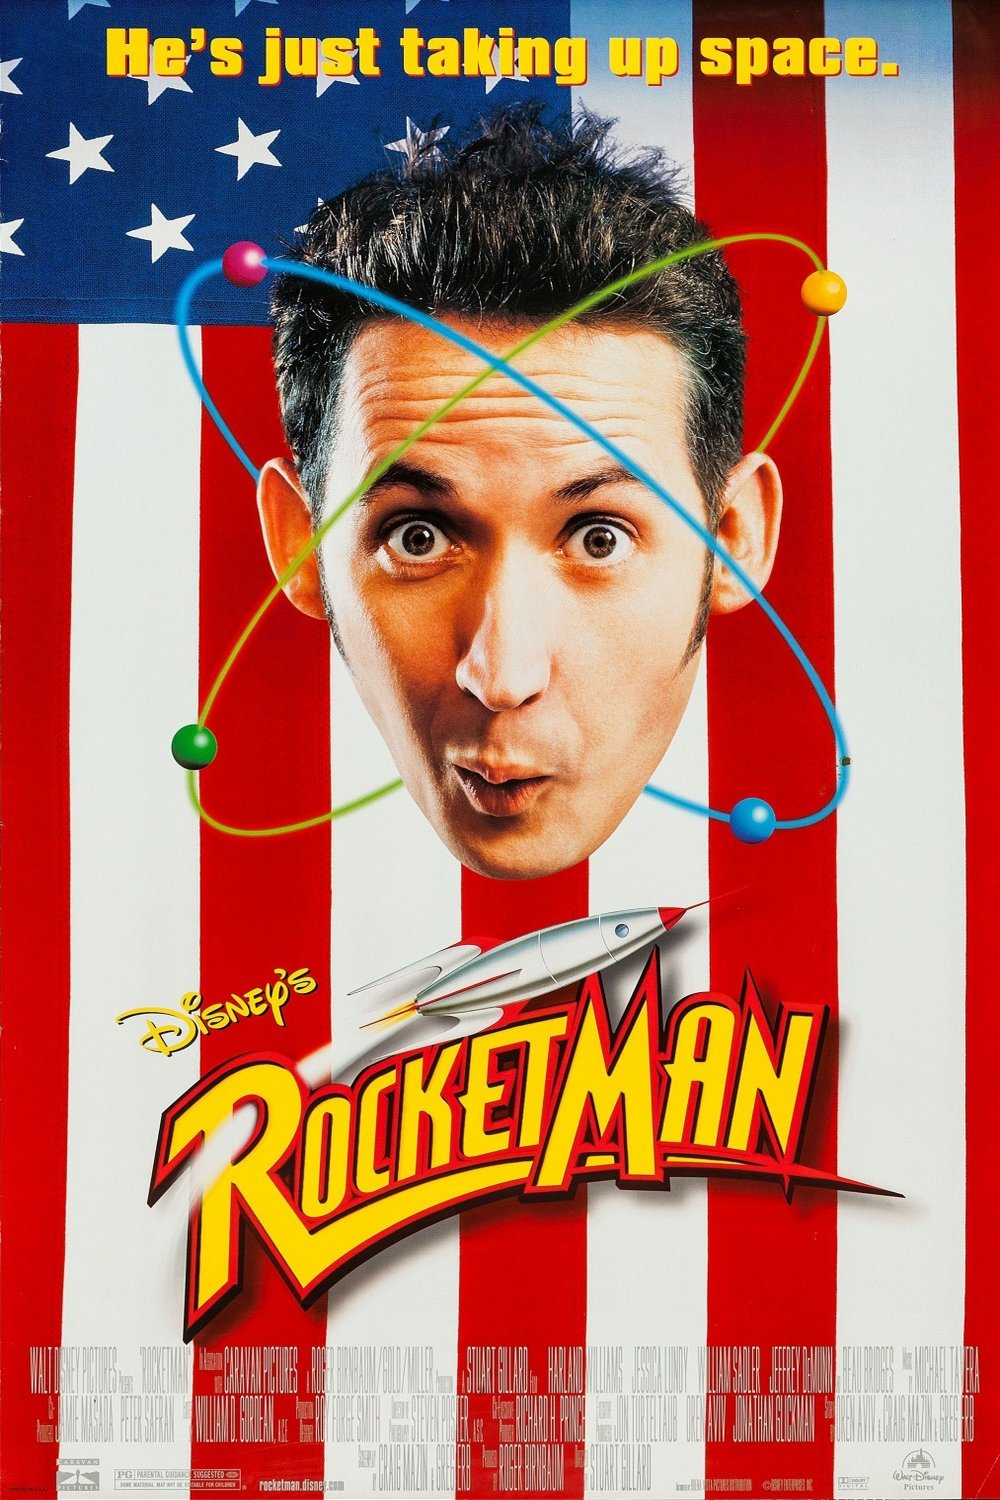 Poster of the movie RocketMan